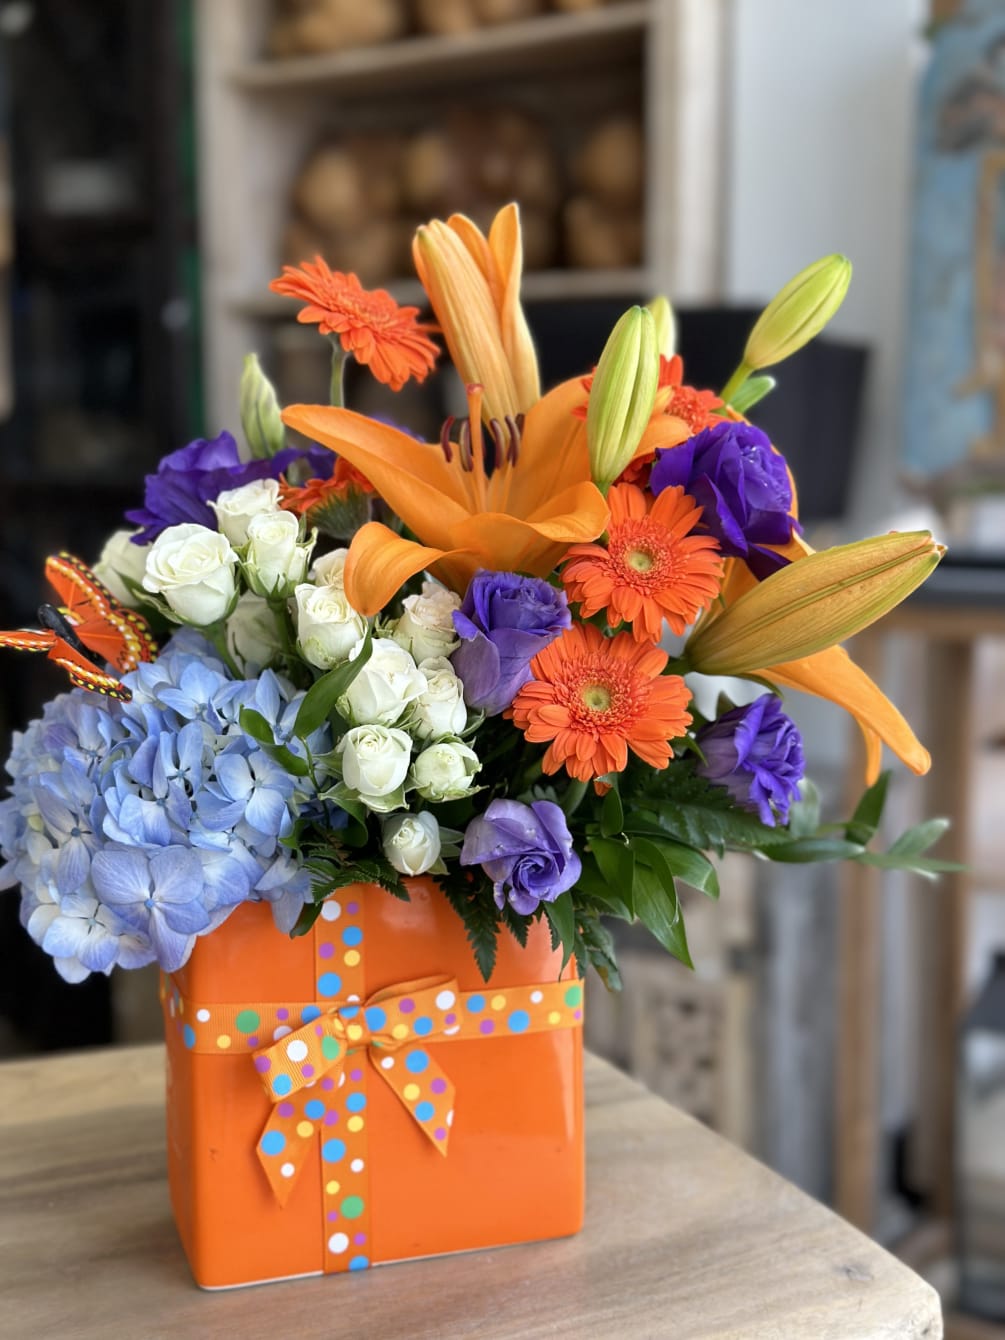 READY FOR THE BACK TO SCHOOL? OUR BRIGHT DEVOTION ARRANGEMENT BRINGS YOU